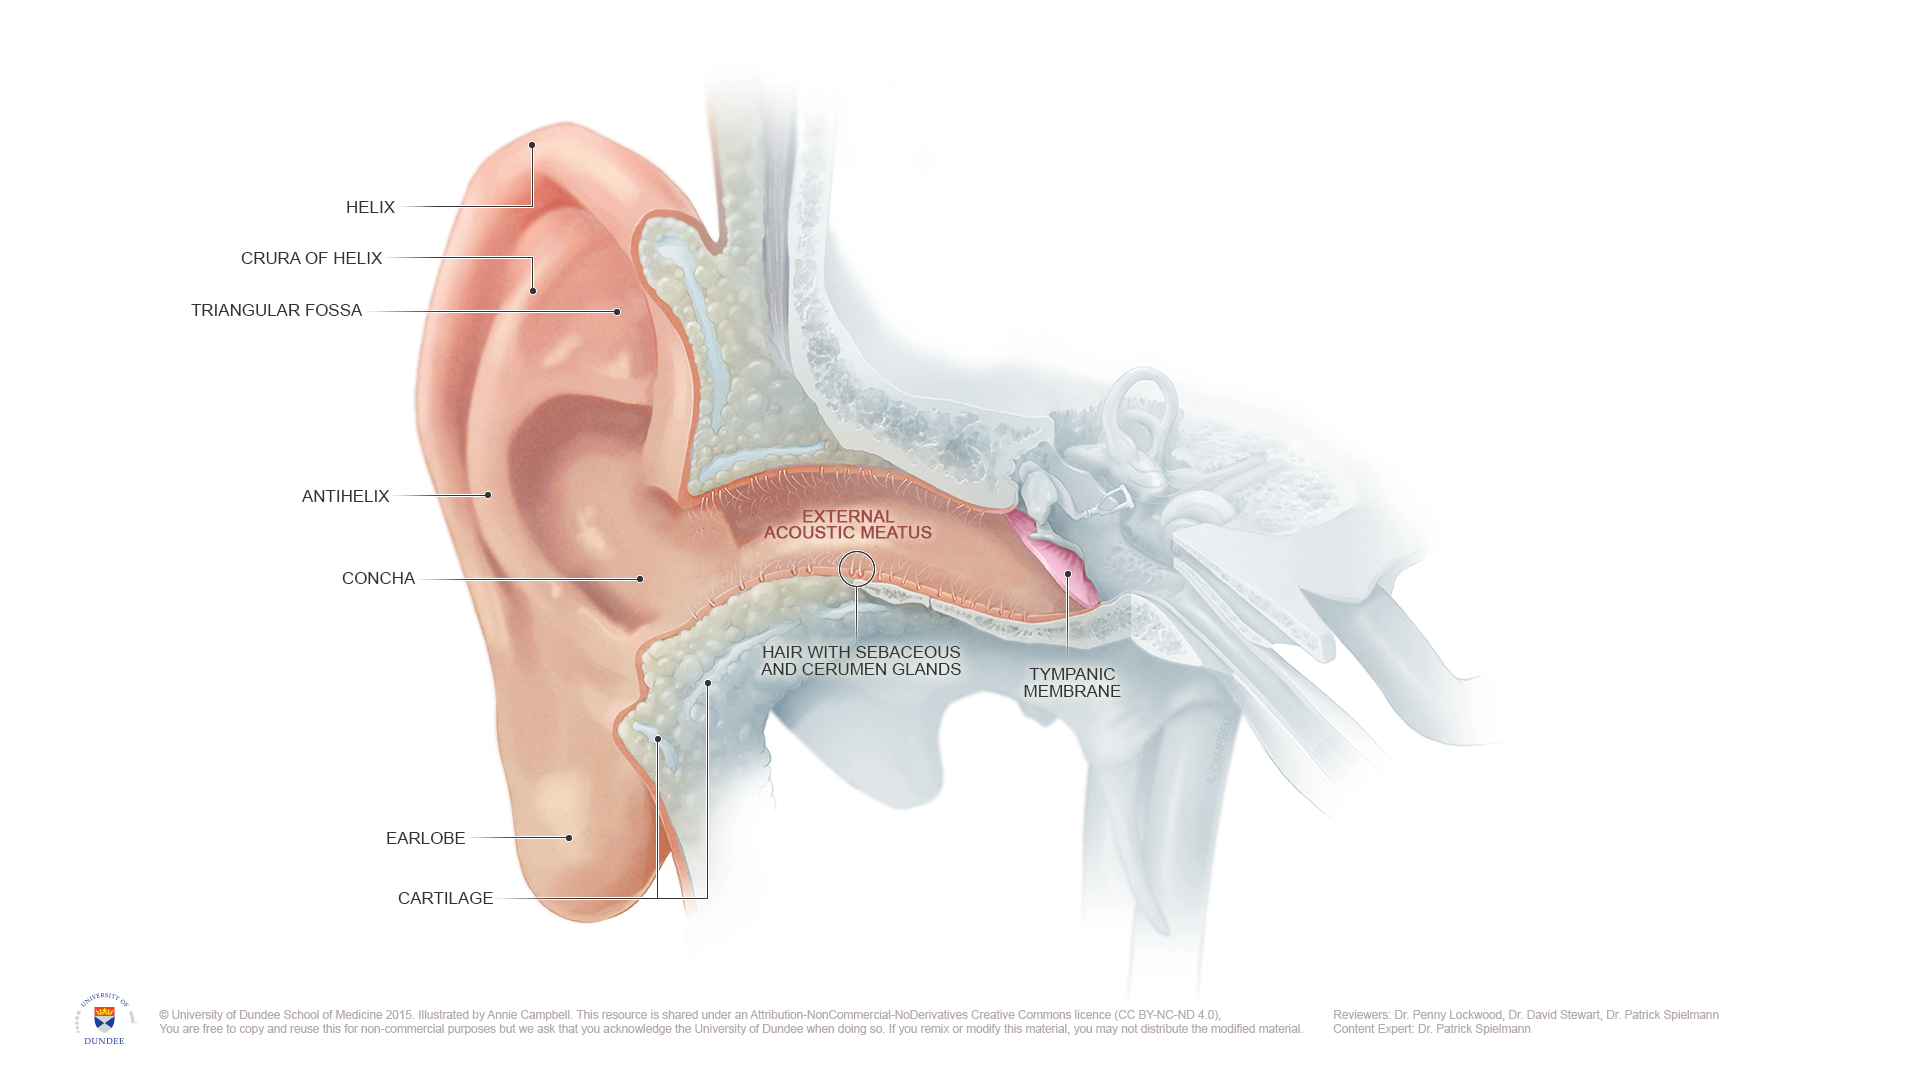 Outer ear anatomy and labelled cartilage